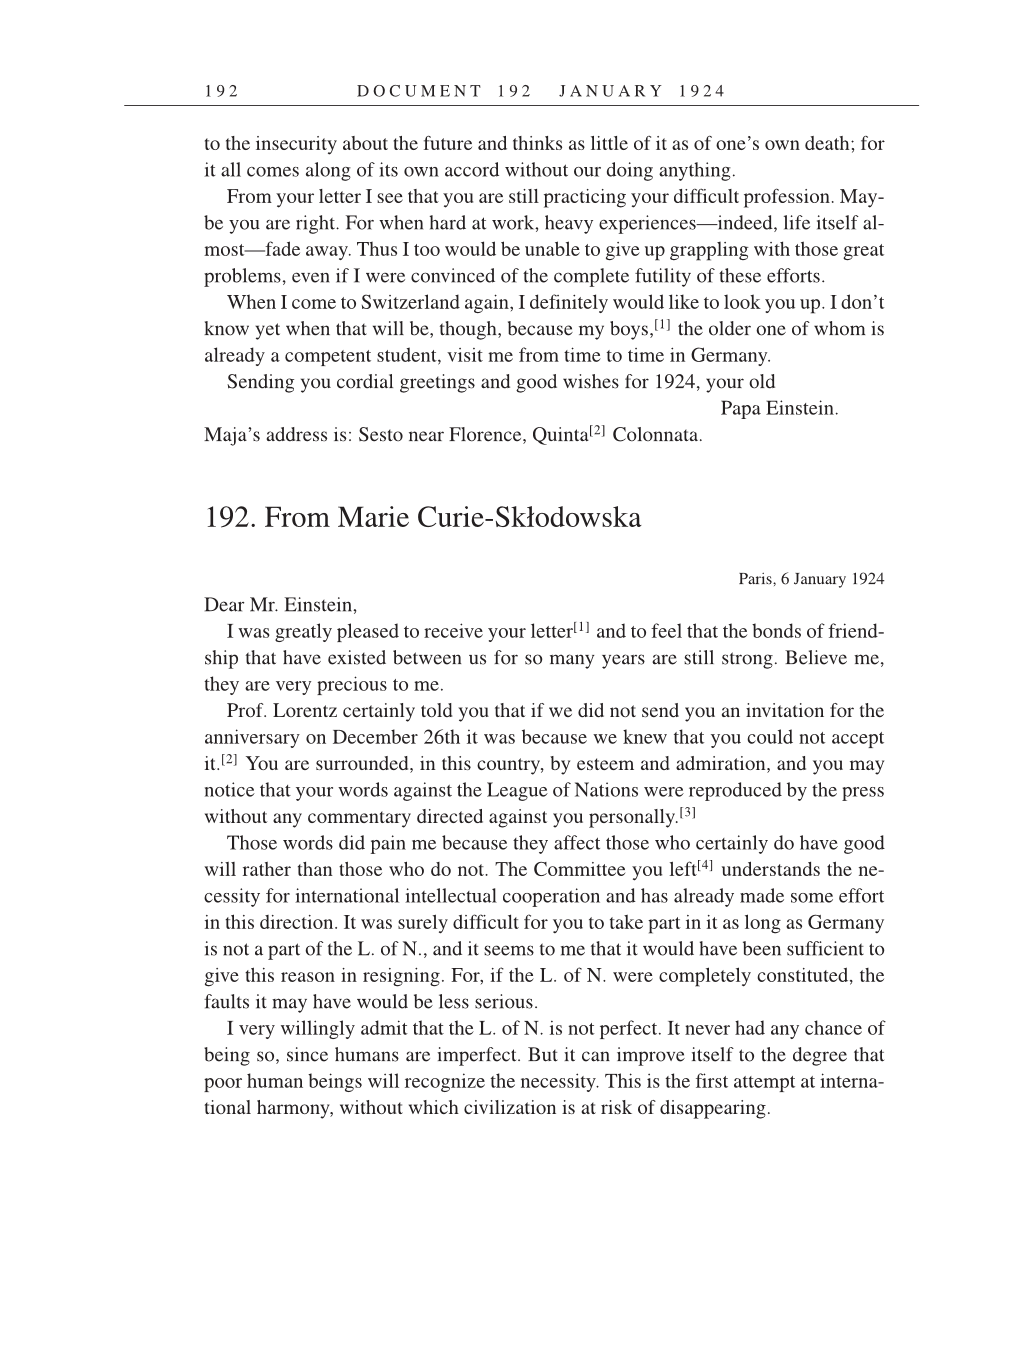 Volume 14: The Berlin Years: Writings & Correspondence, April 1923-May 1925 (English Translation Supplement) page 192